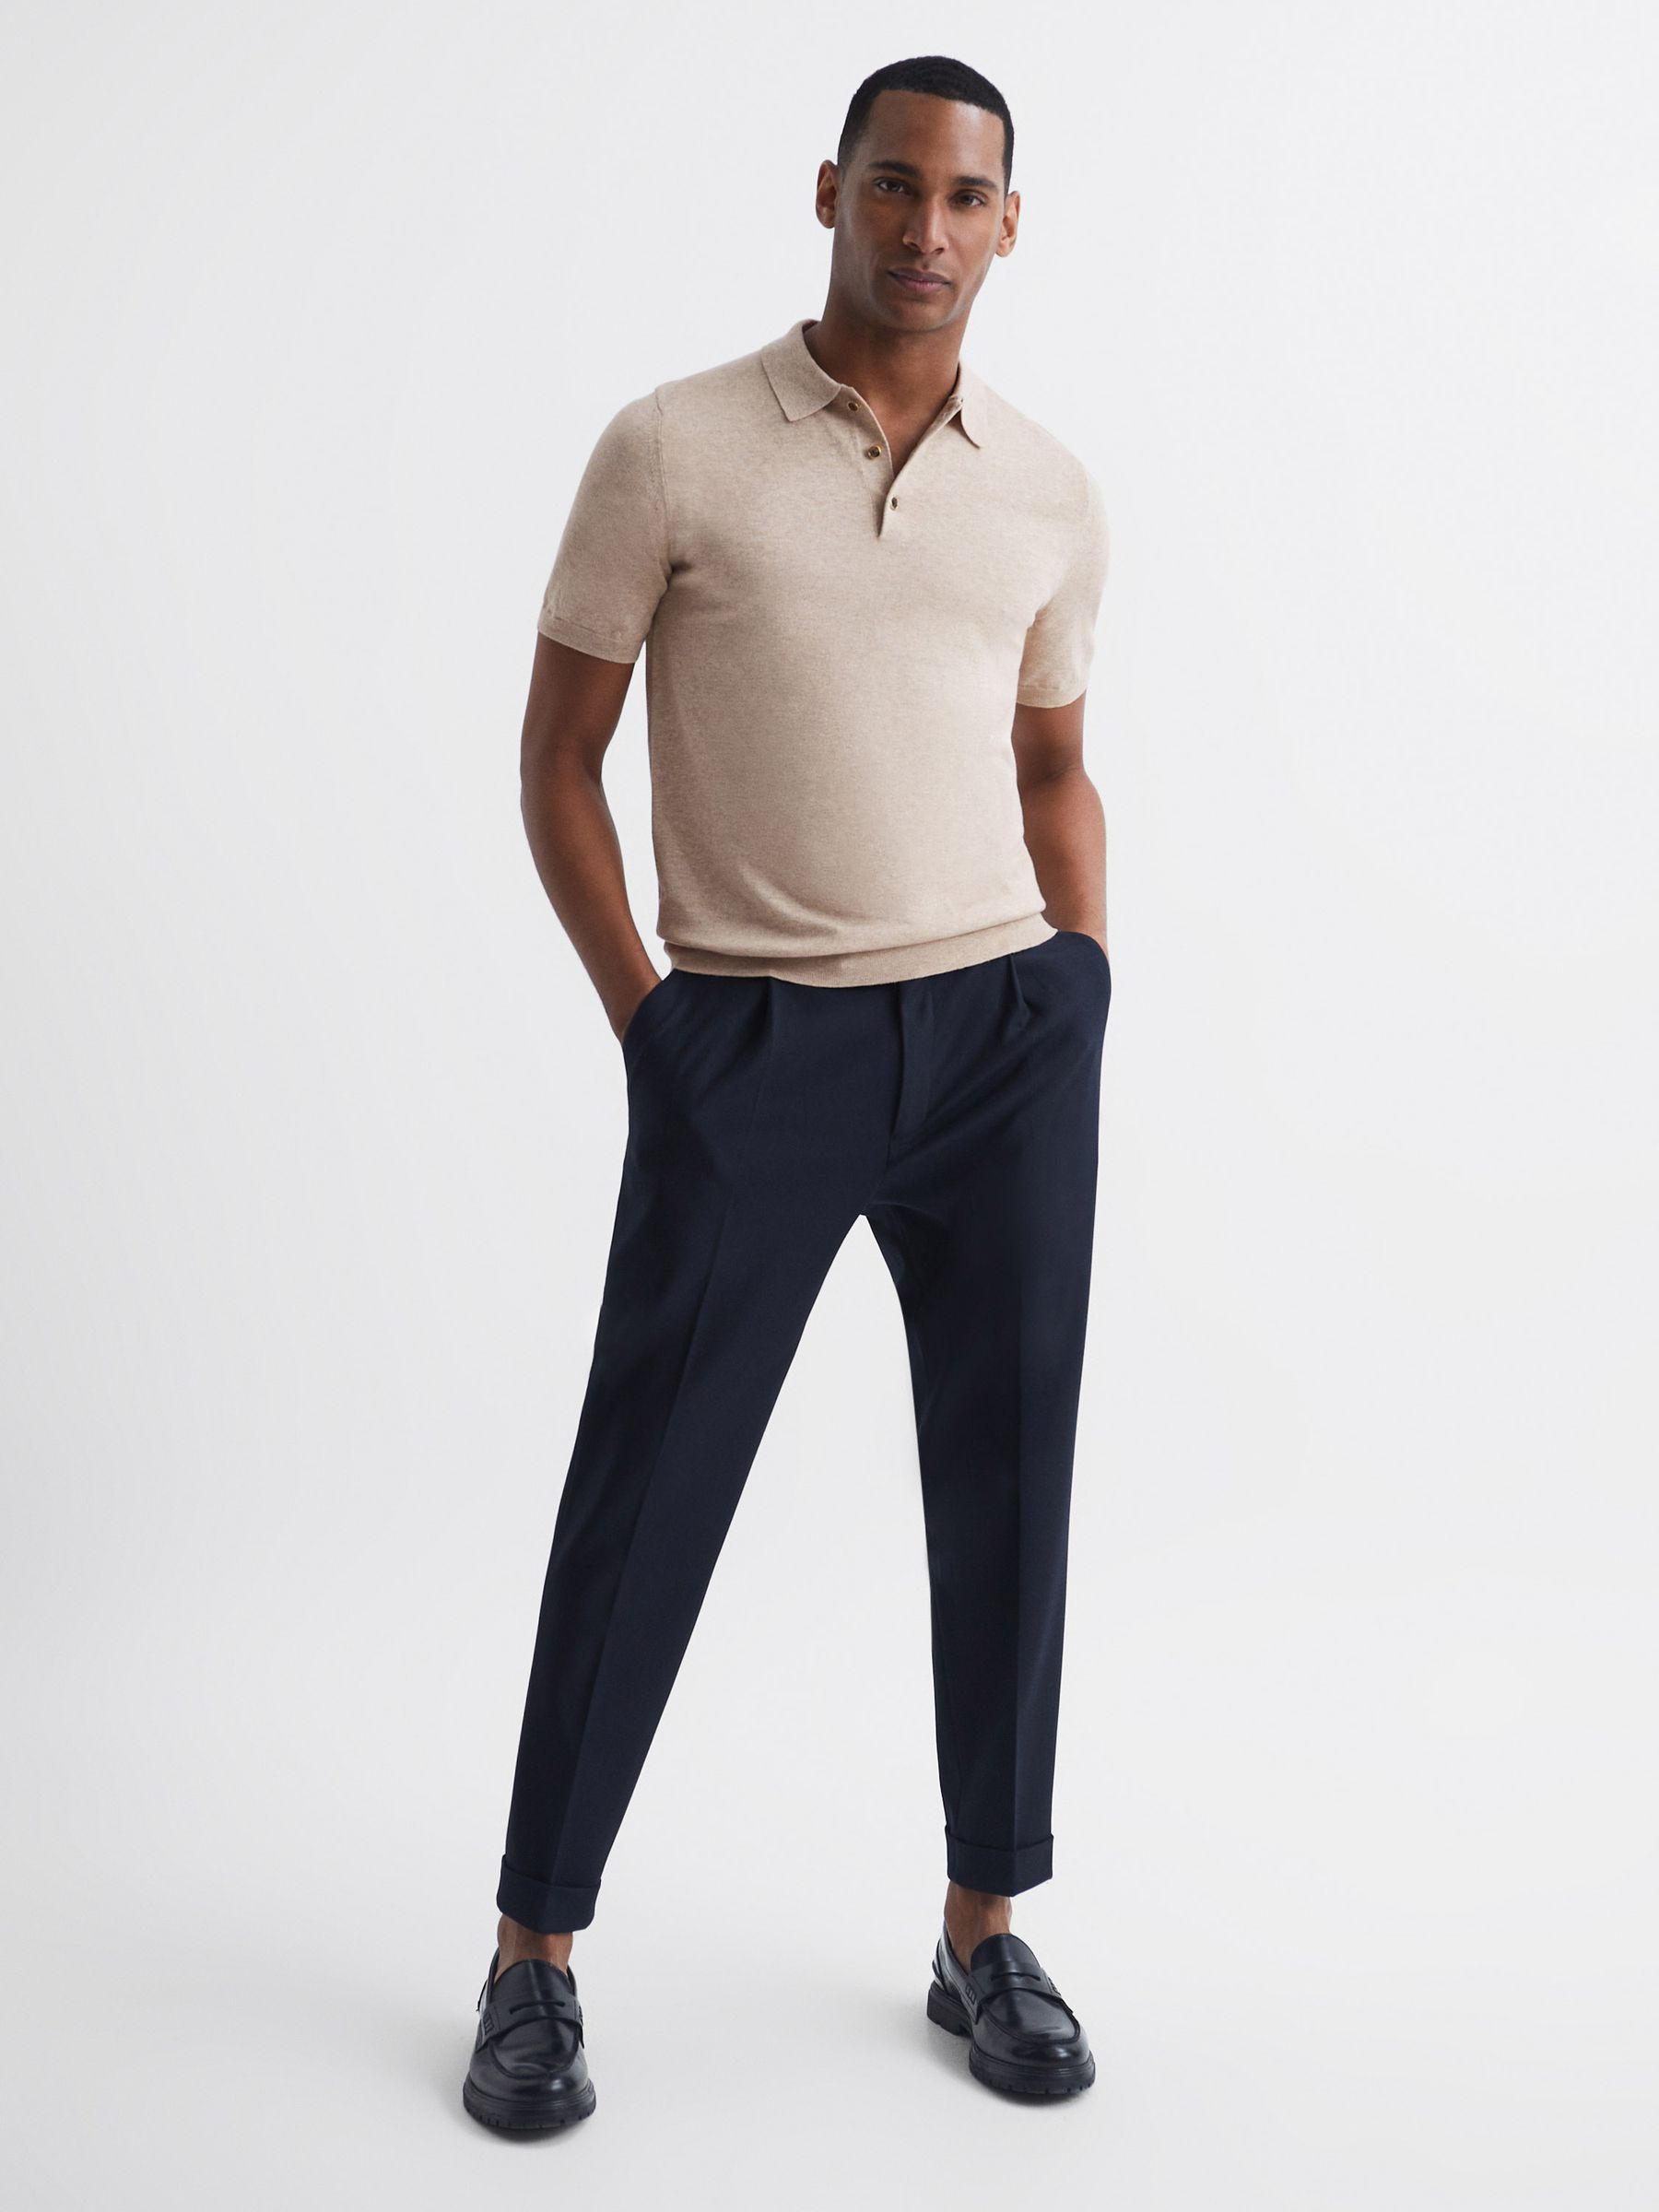 Reiss Wilton Slim Fit Knitted Polo Shirt - REISS